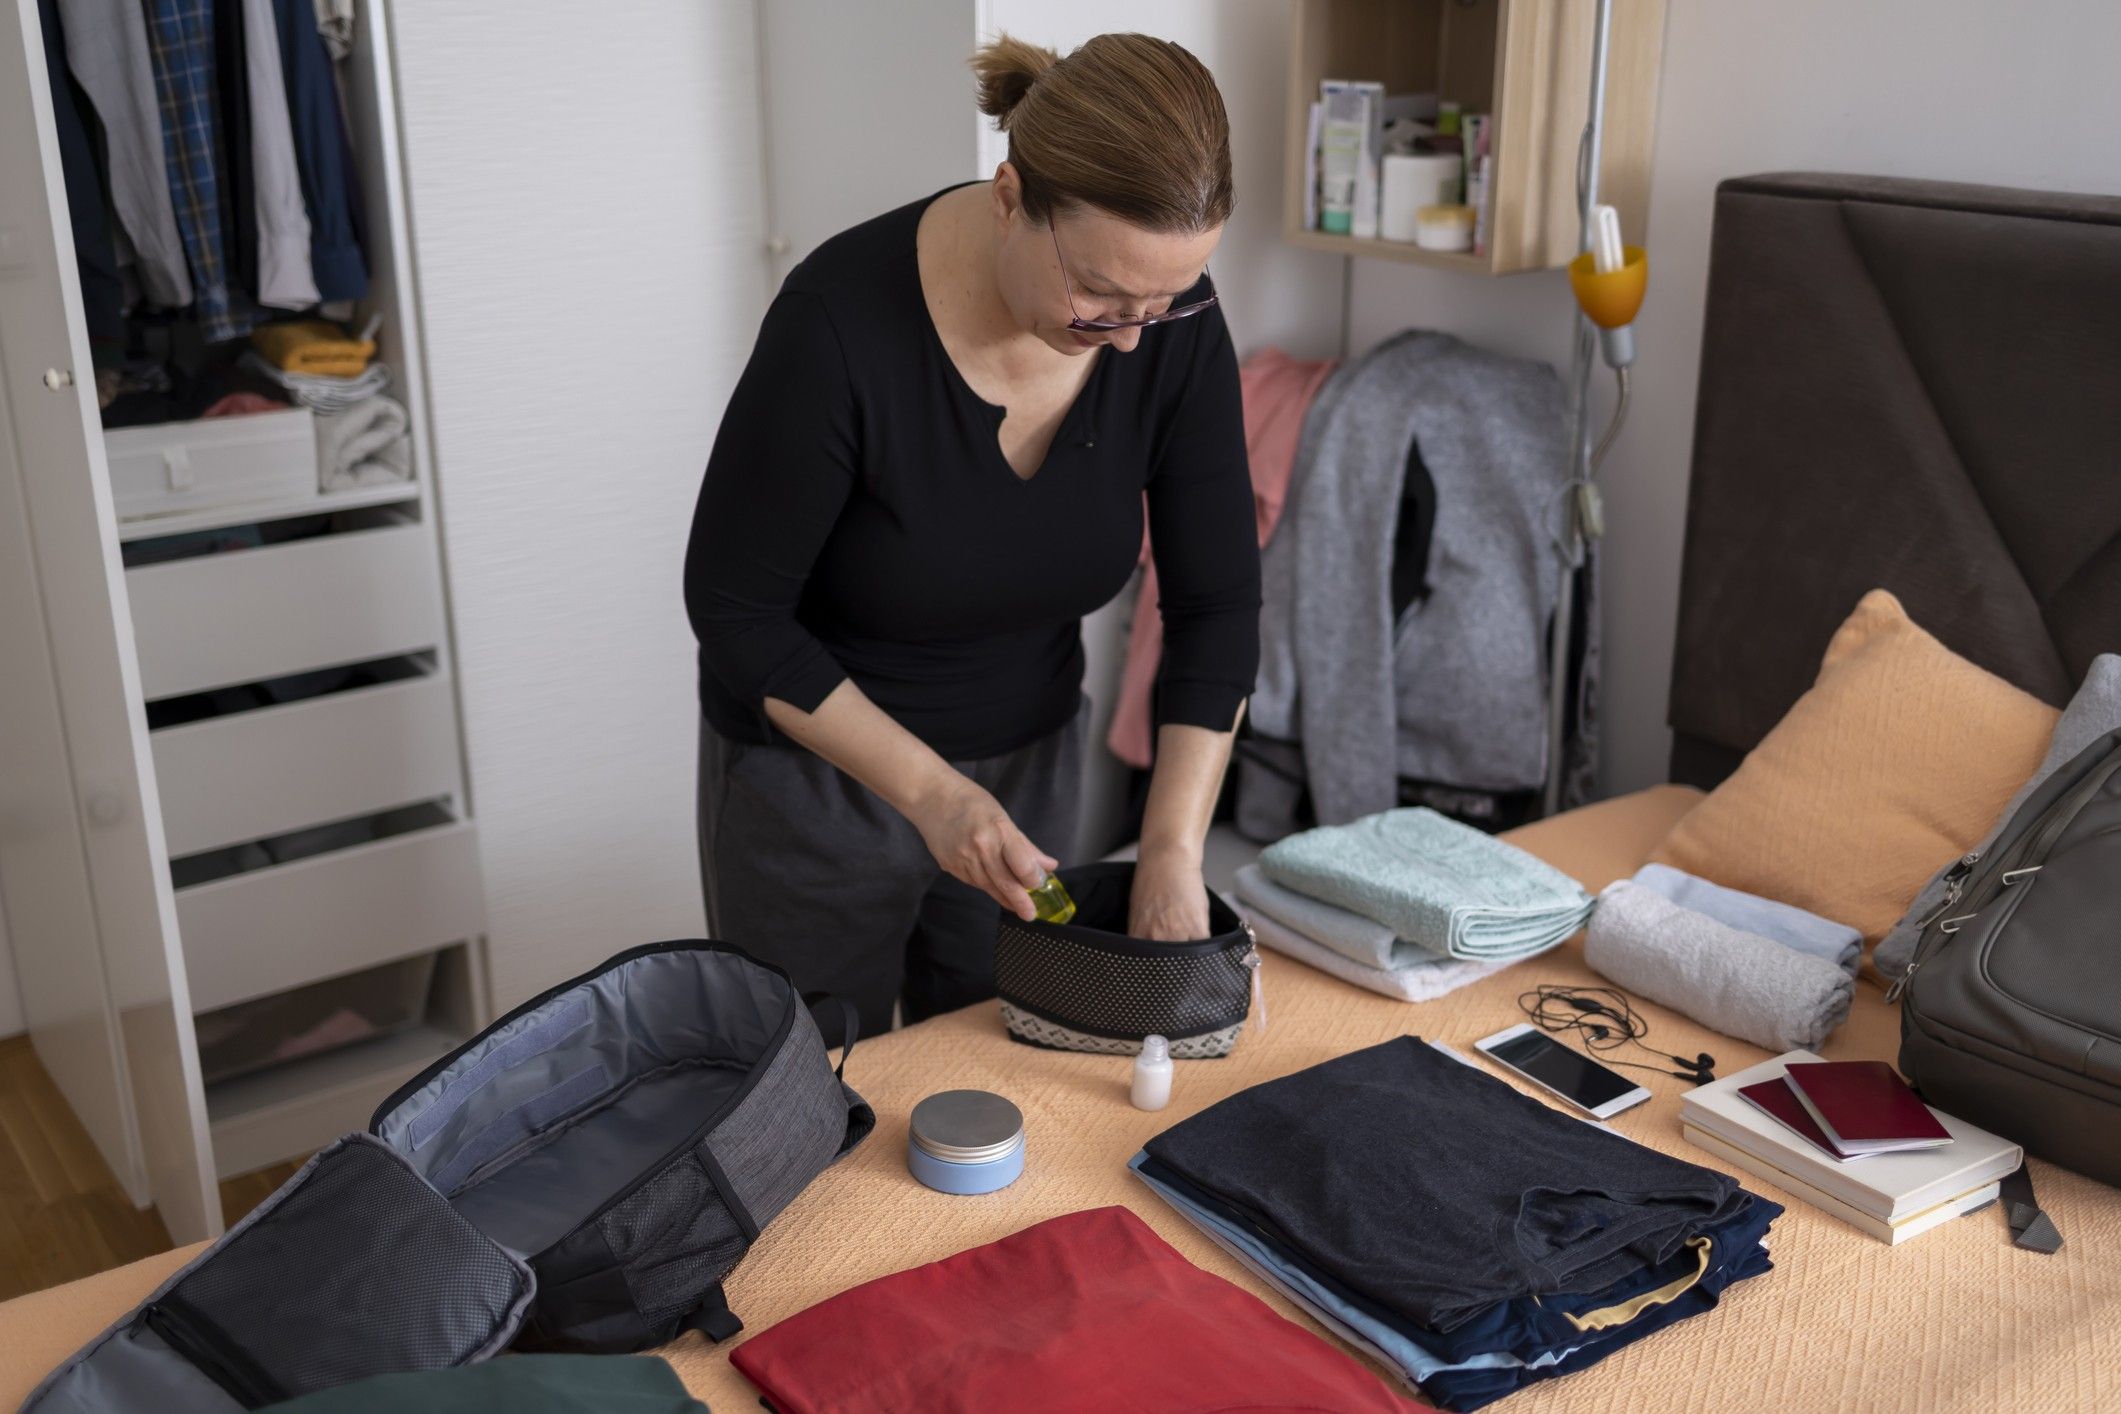 A woman packs items into a small suitcase.